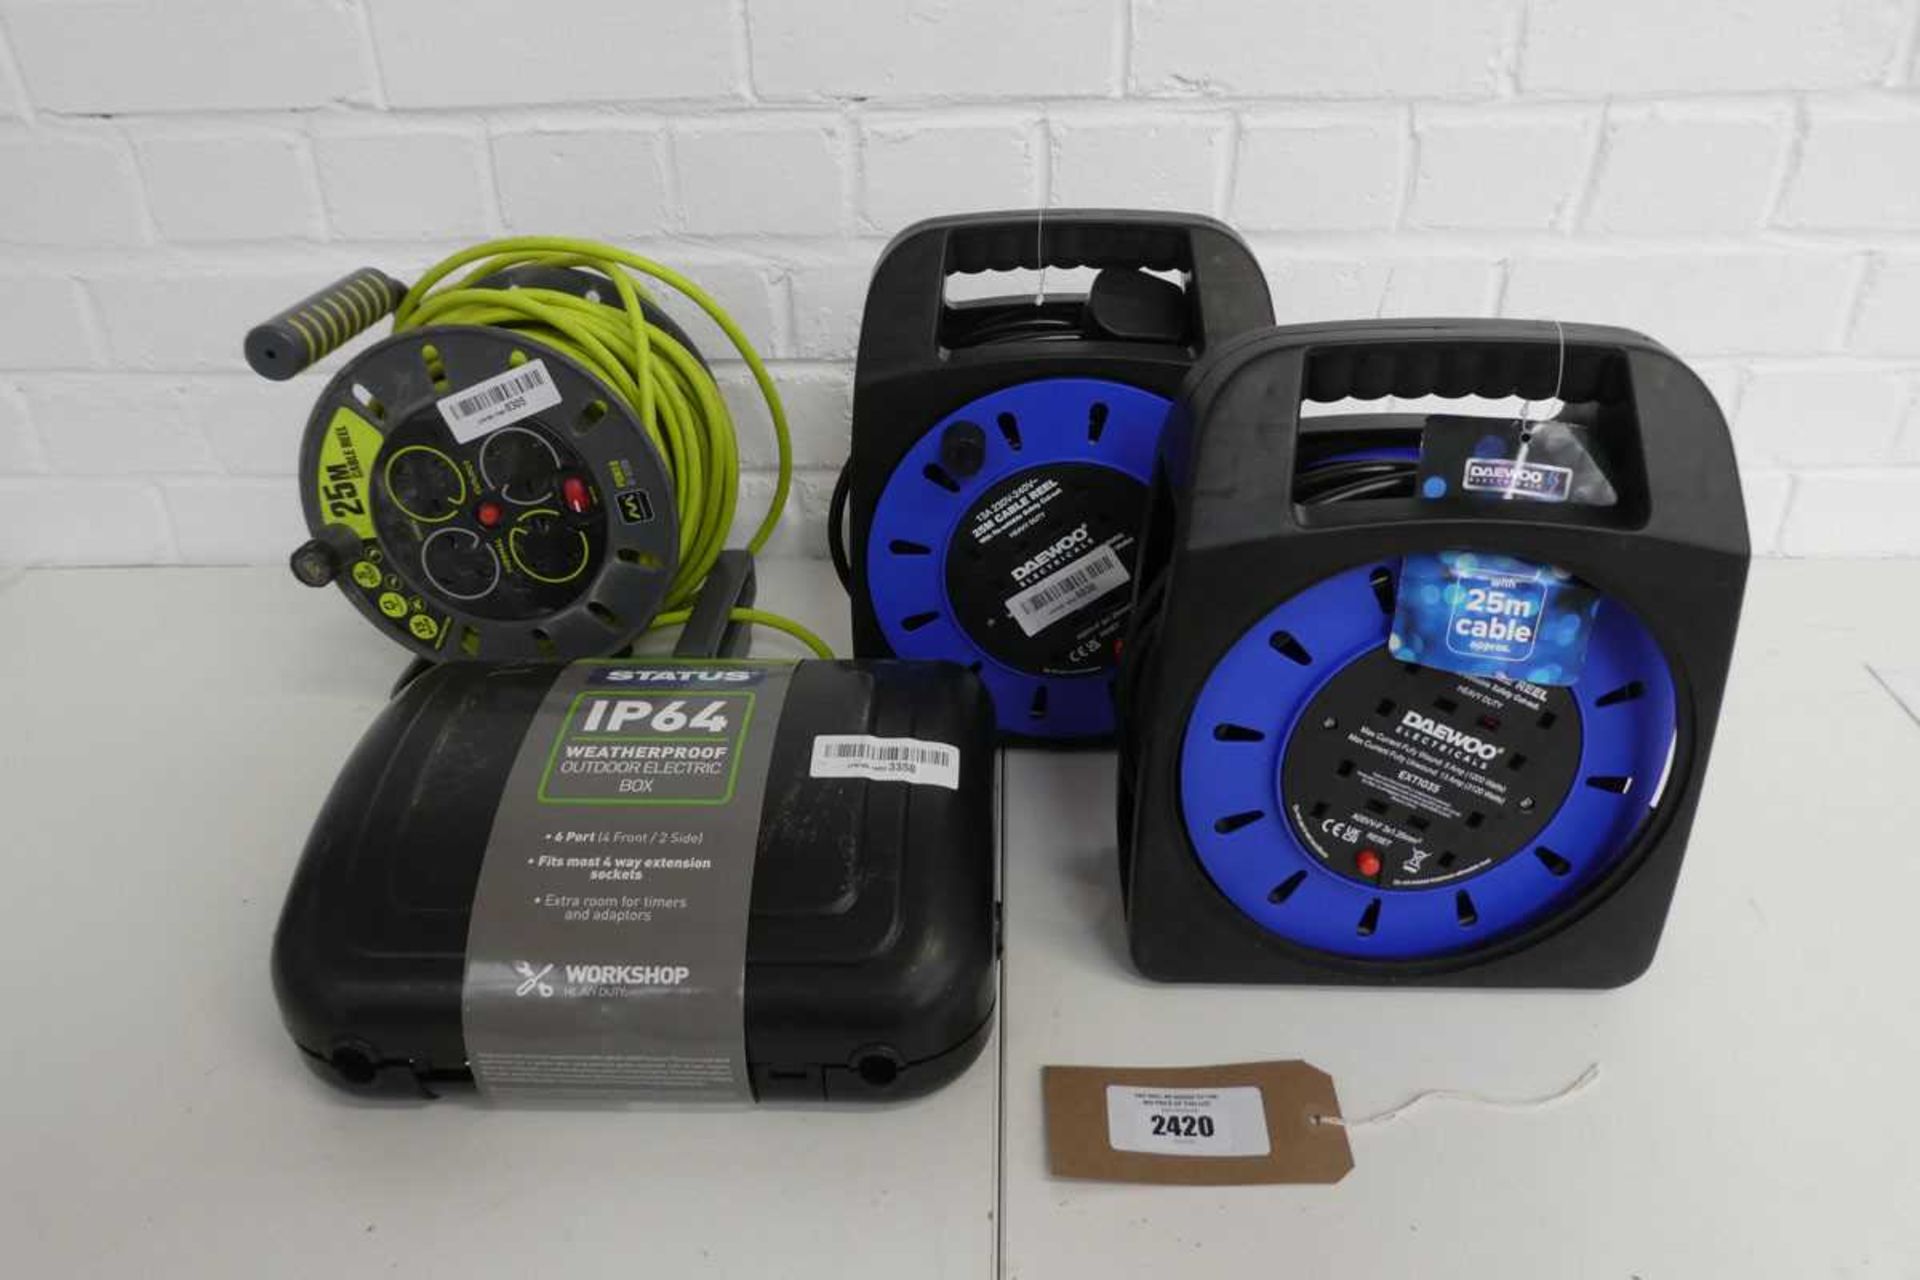 +VAT Masterplug 25m cable reel with 2 Daewoo heavy duty 25m cable reels and Status IP64 weatherproof